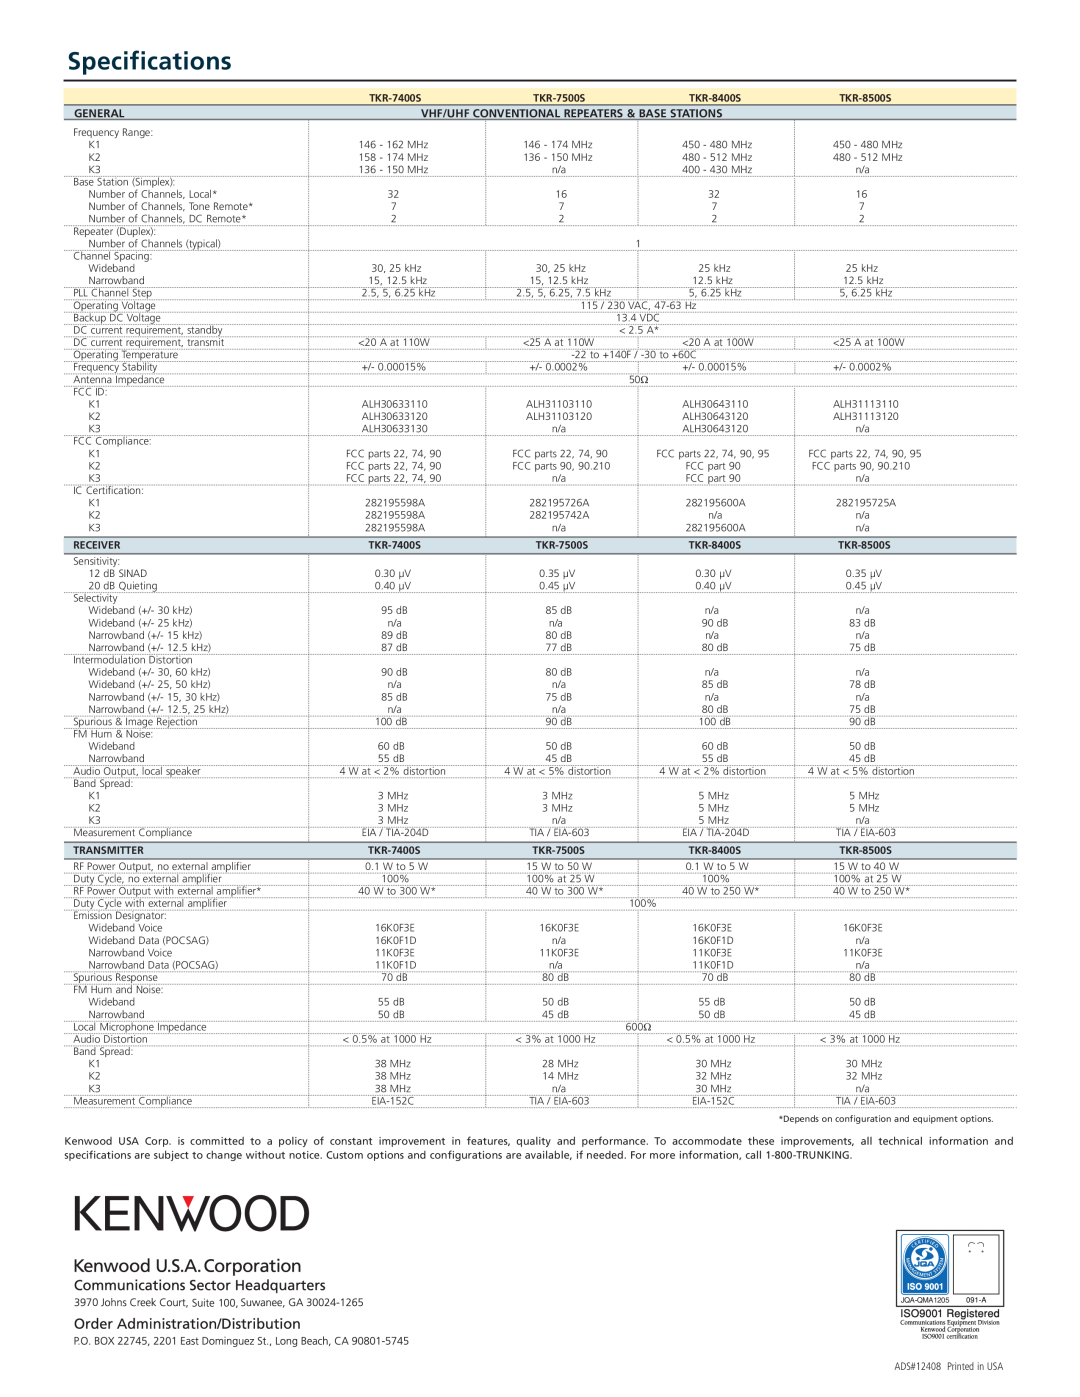 Kenwood TKR-7400S Specifications, General, Vhf/Uhf Conventional Repeaters & Base Stations, TKR-7500S, TKR-8400S, TKR-8500S 